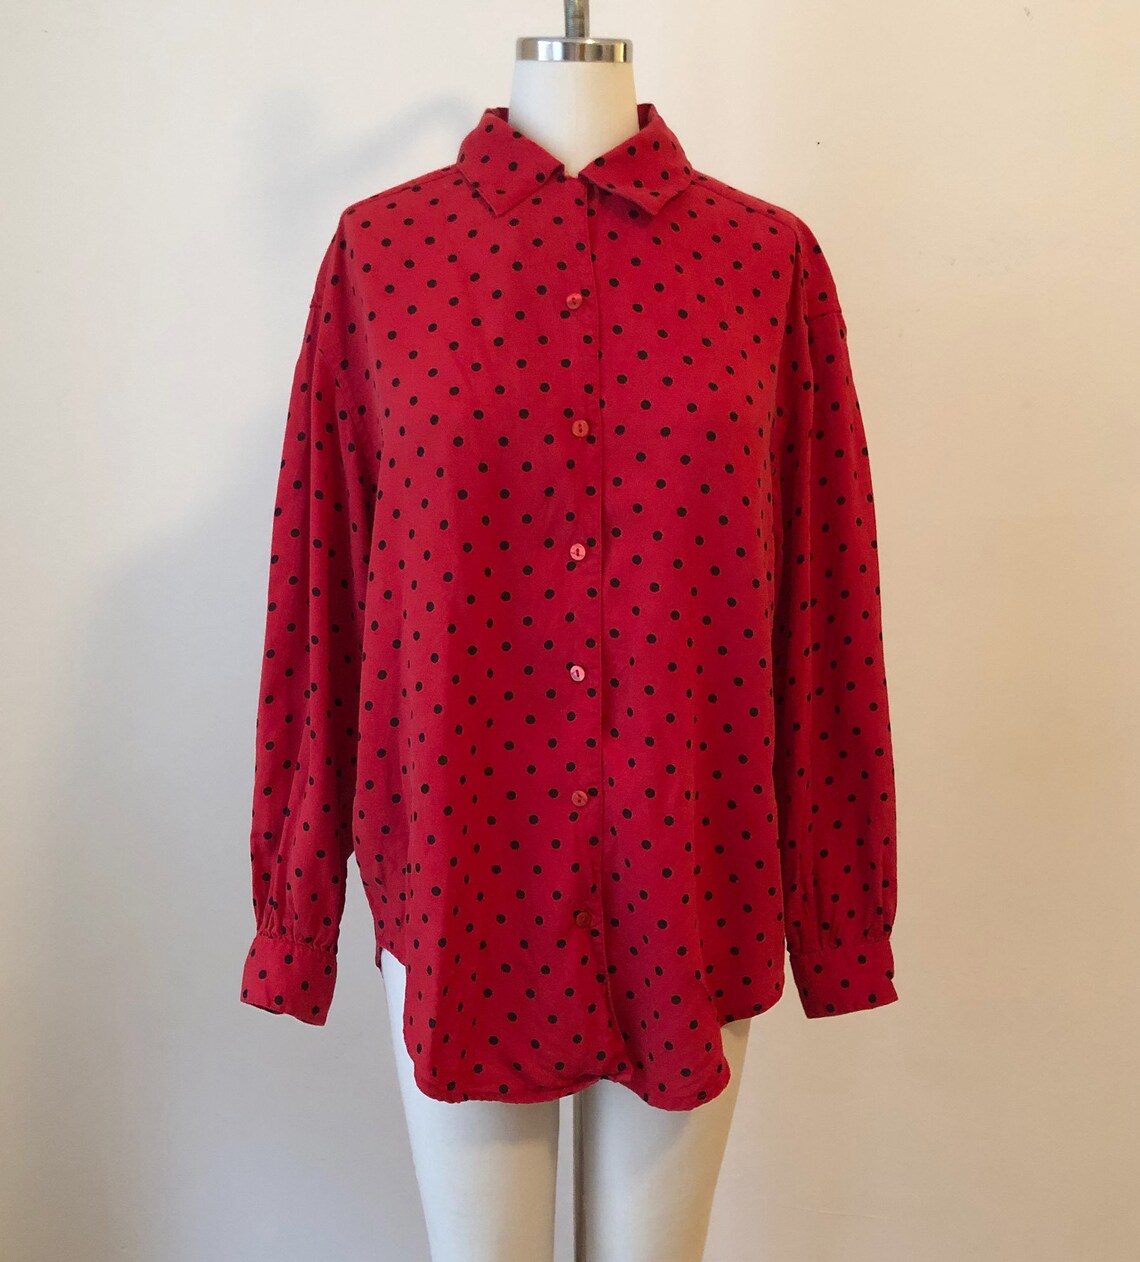 Red and Black Polka Dot Oversized Shirt Early 1990s | Etsy